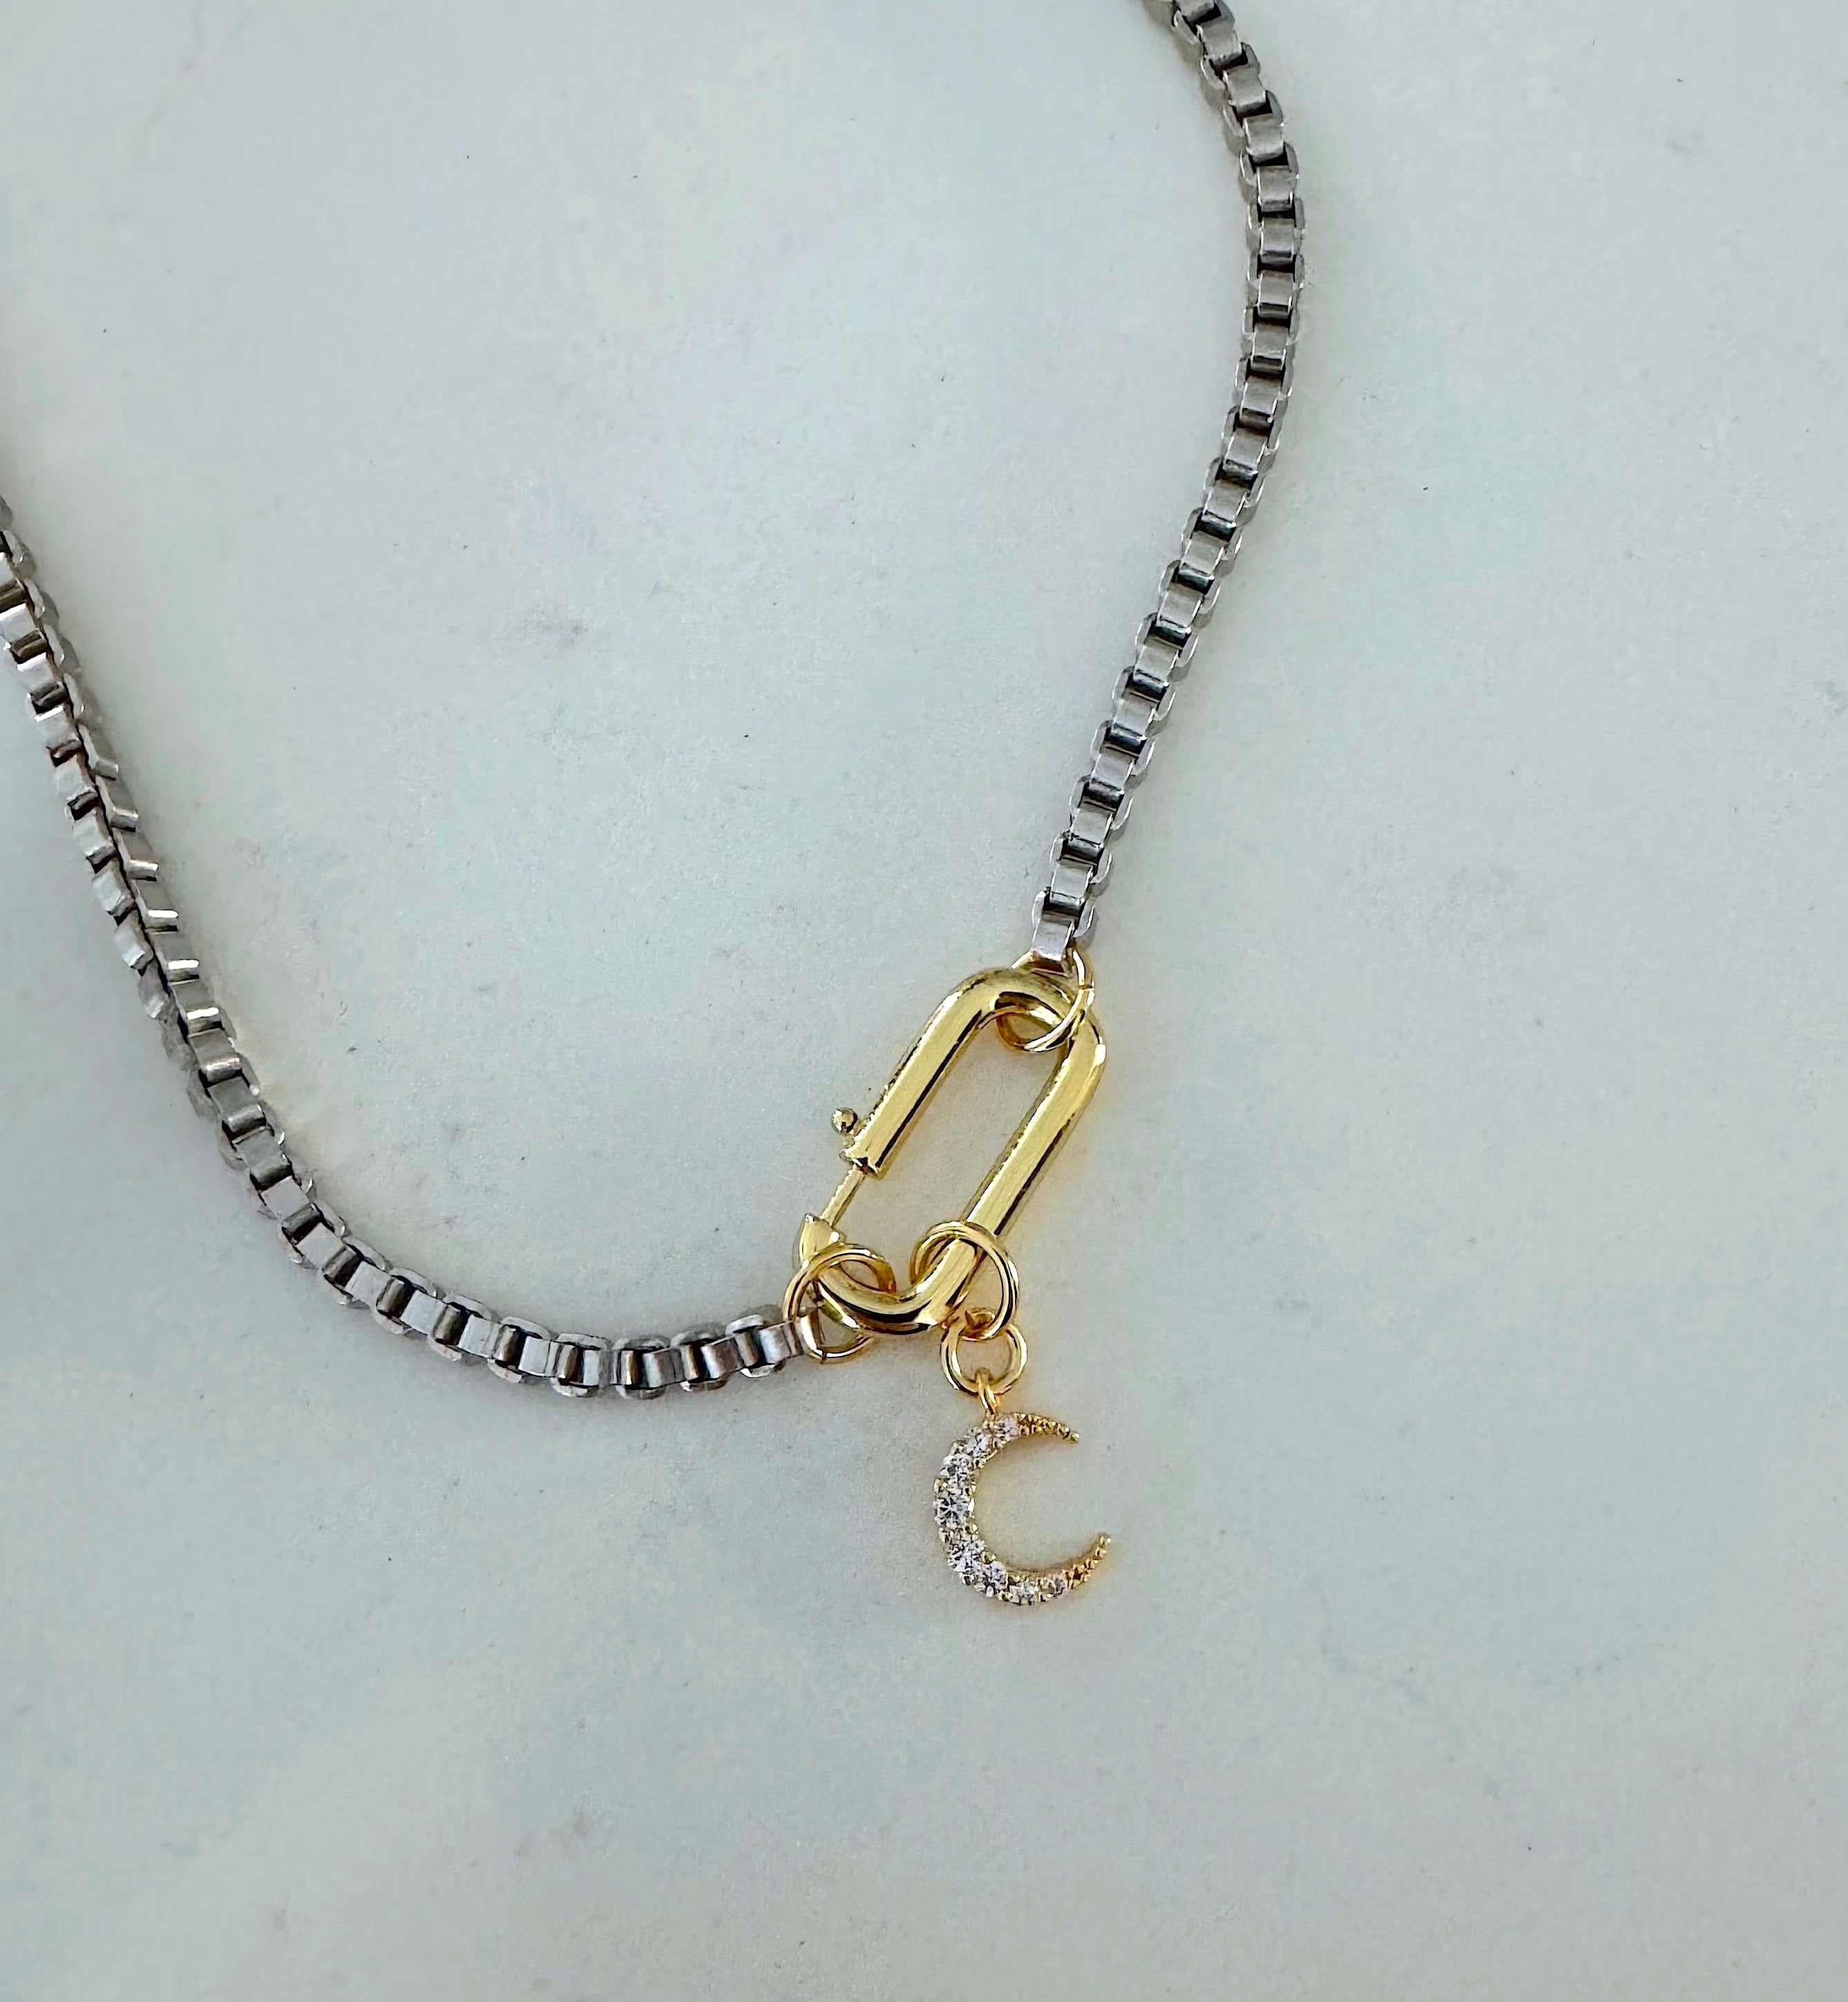 Hi what does 777 mean?Its Gold coloured, but dont see ither mark! :  r/JewelryIdentification